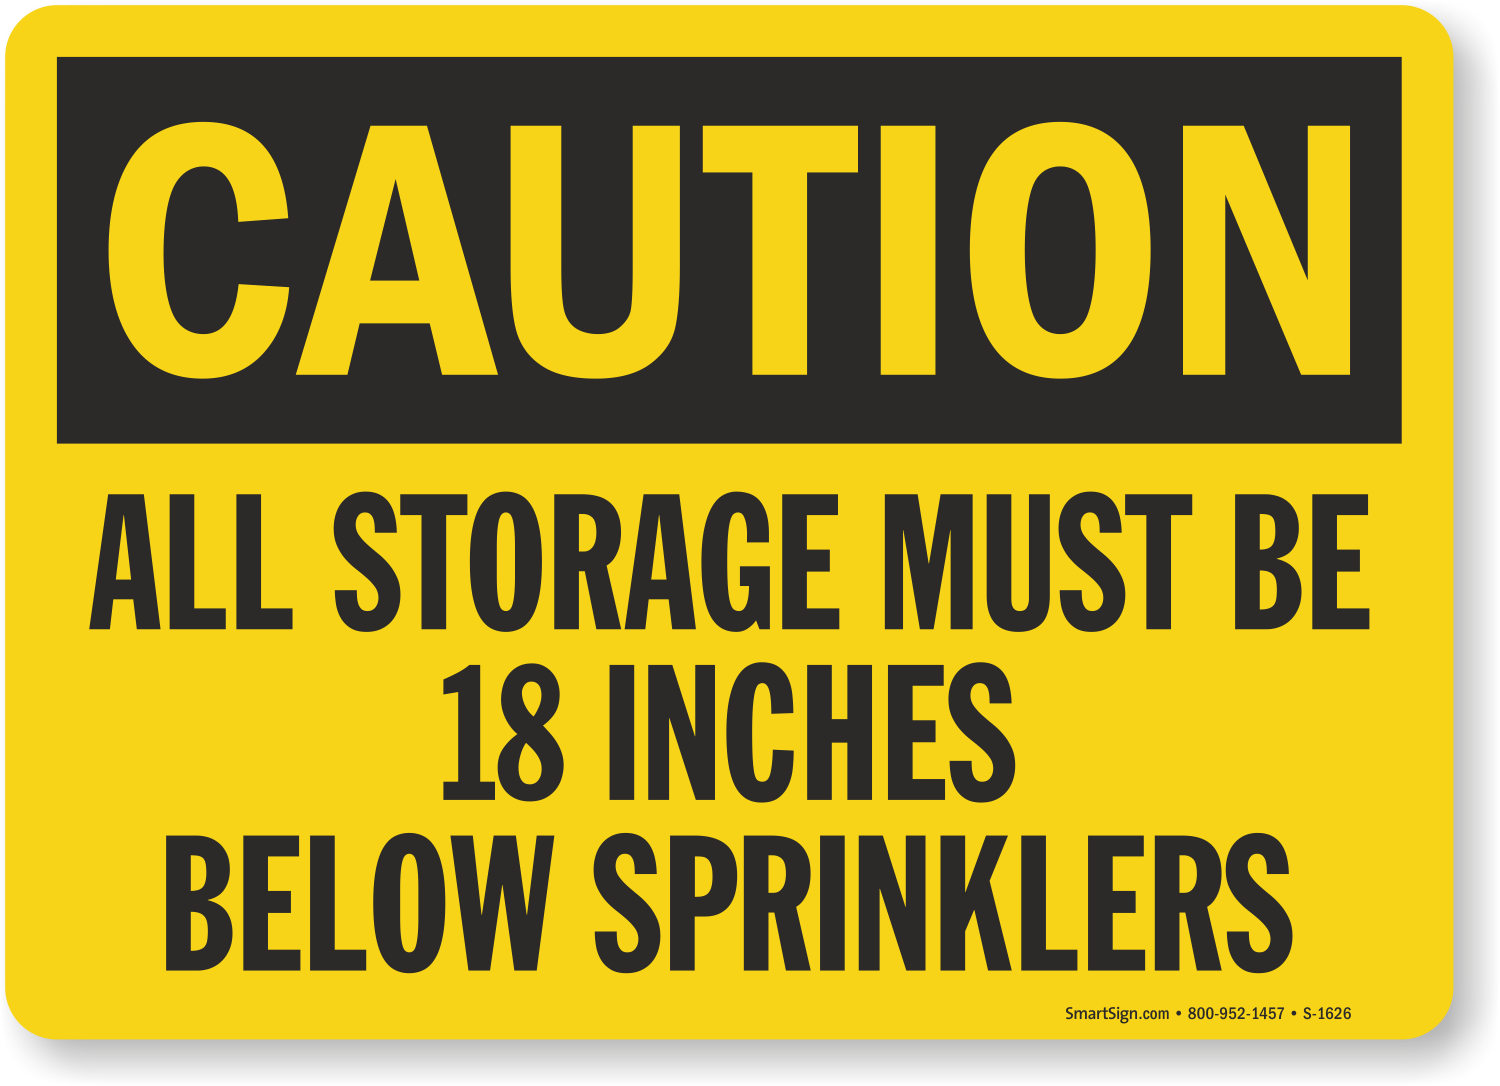 https://www.mysafetysign.com/img/lg/S/sprinklers-caution-sign-s-1626.png